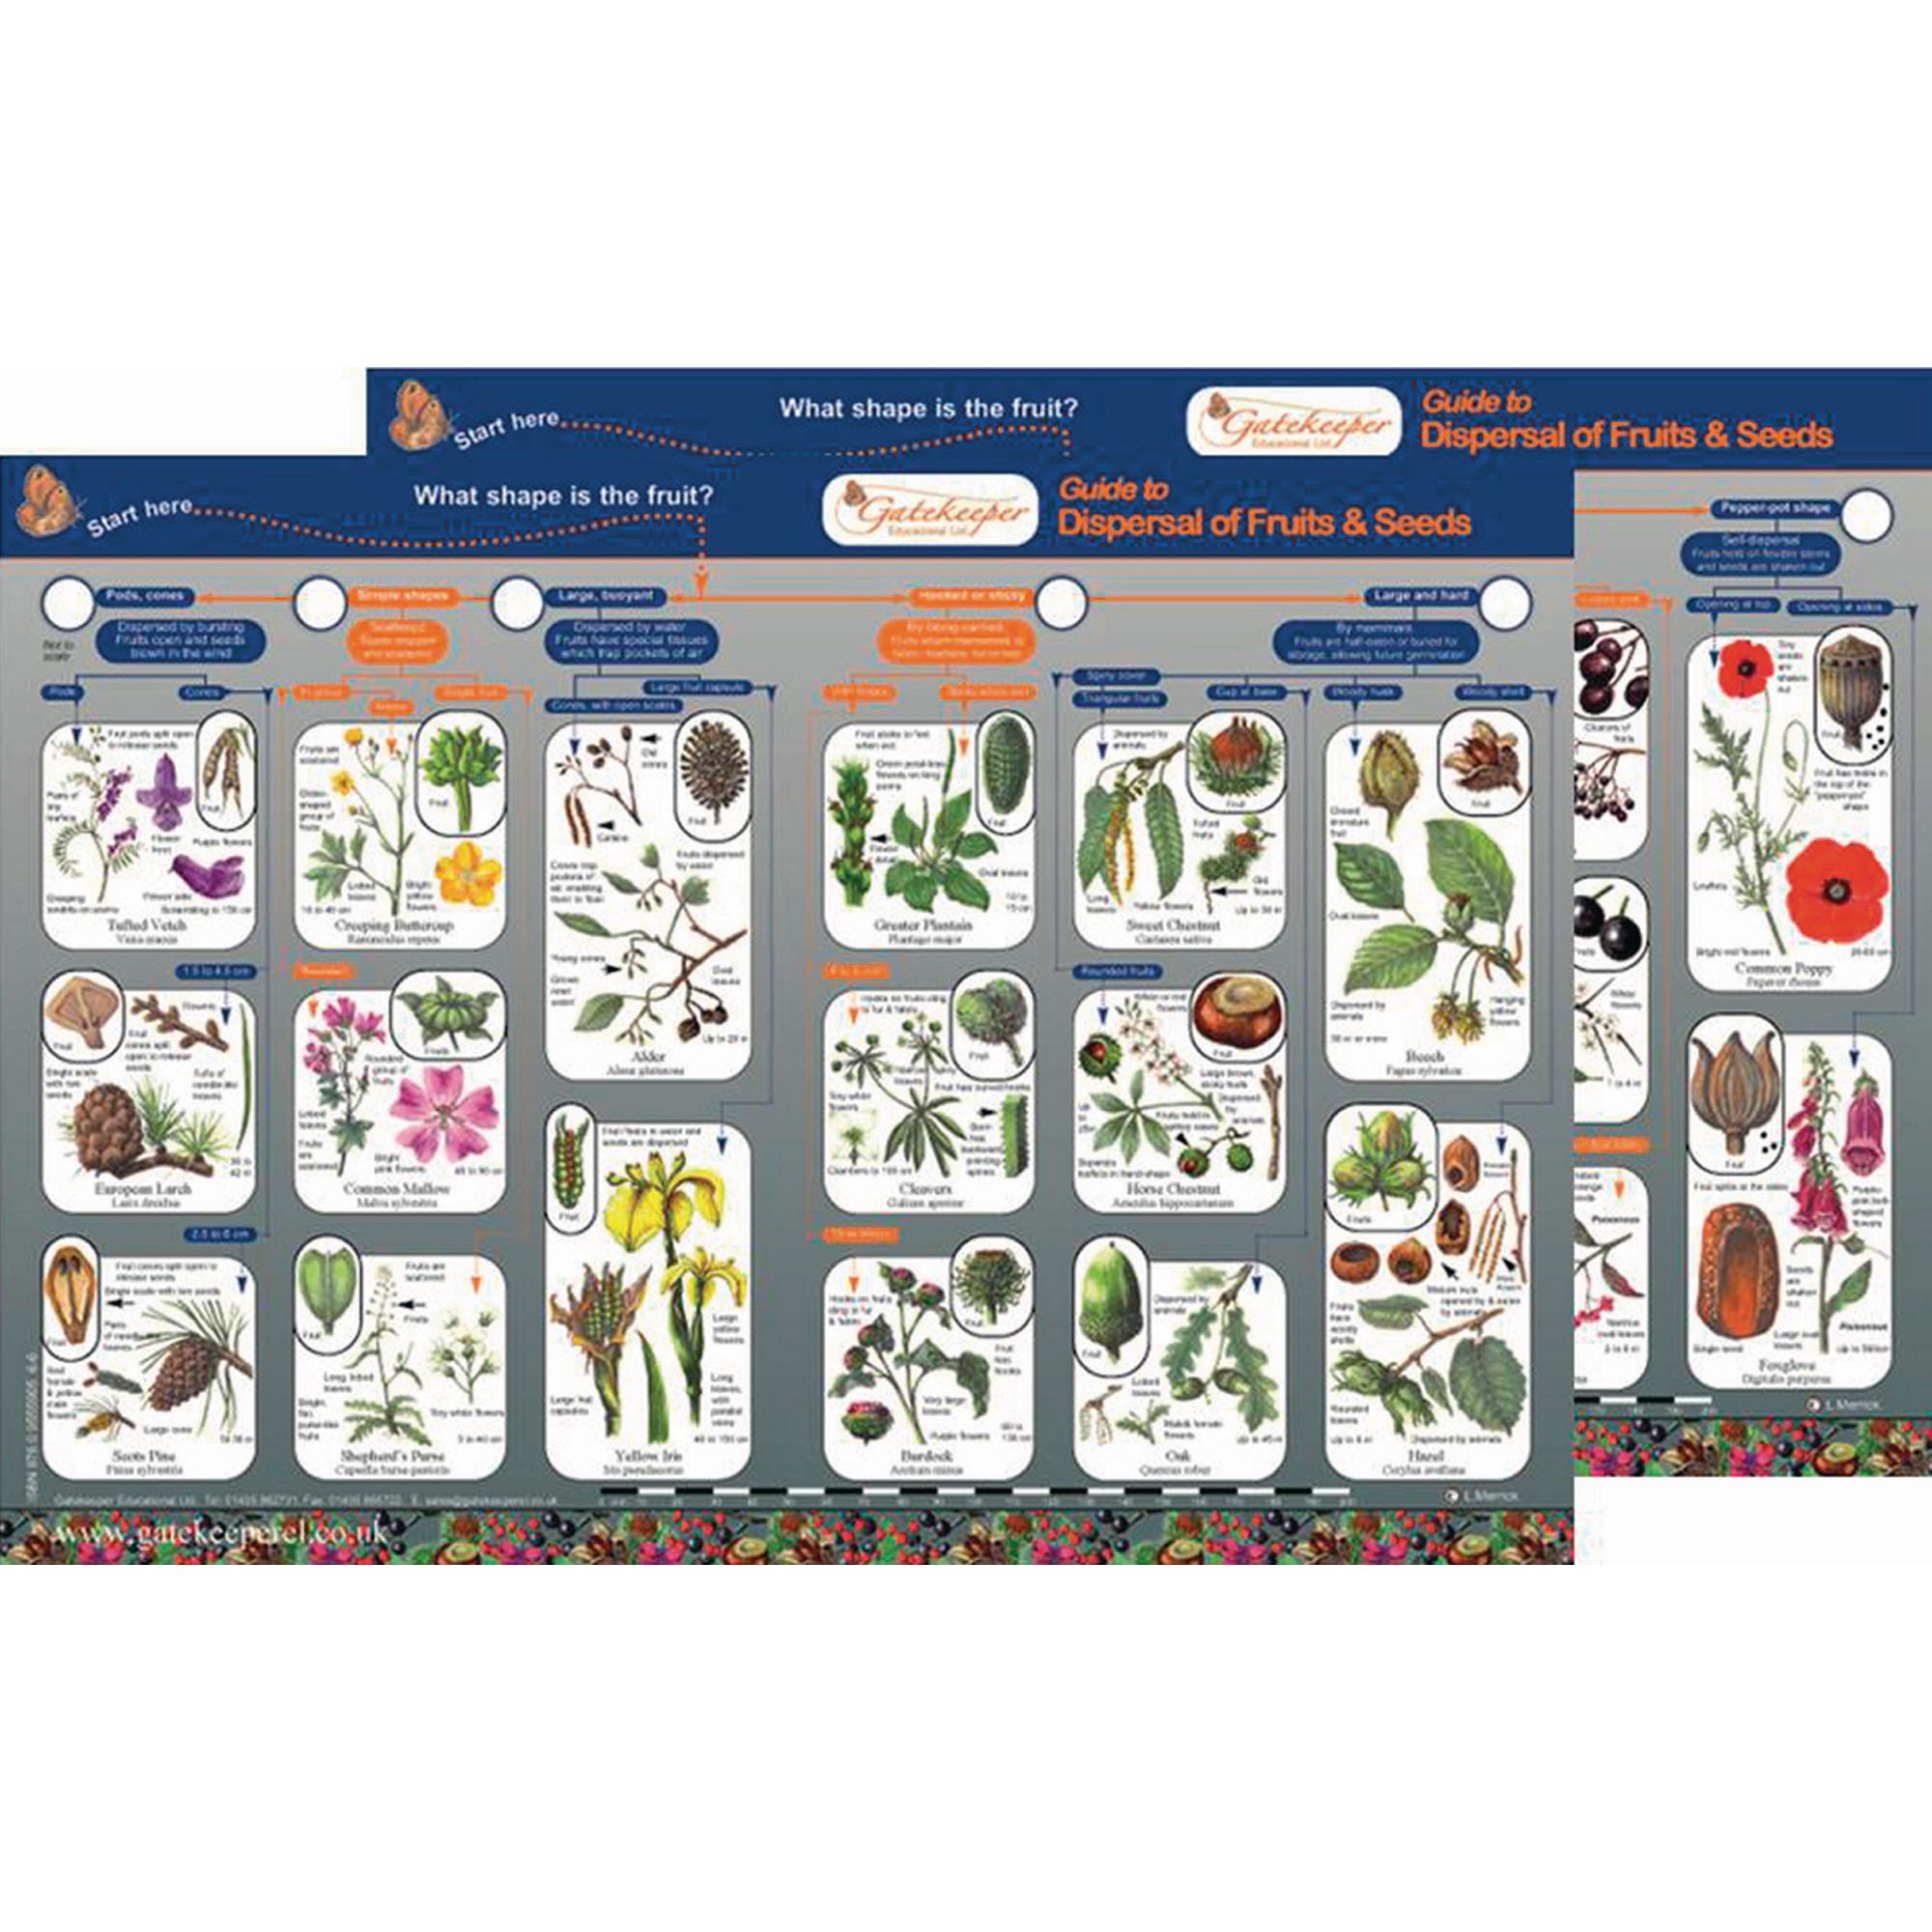 Dispersal Of Fruits And Seeds Guide